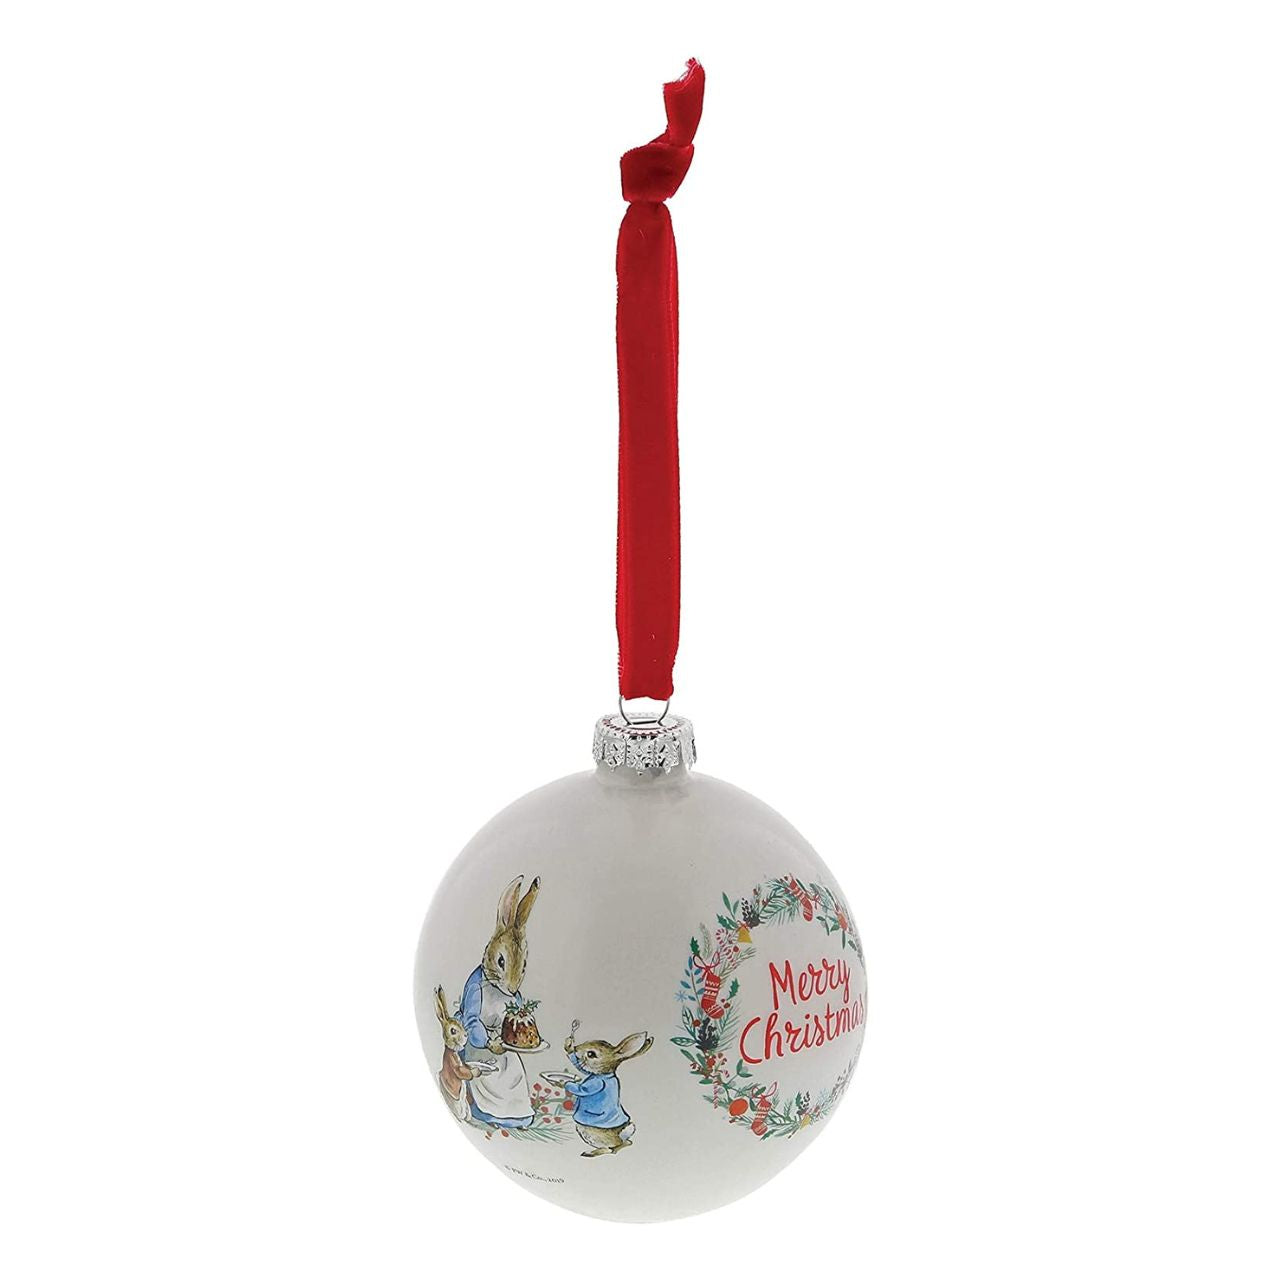 Beatrix Potter Peter Rabbit Christmas Bauble  A beautiful glass Peter Rabbit Bauble that makes a treasured keepsake all year round. The artwork for each product is taken from the original illustrations from the Beatrix Potter stories, helping bring each character to life. Presented in a branded gift box.